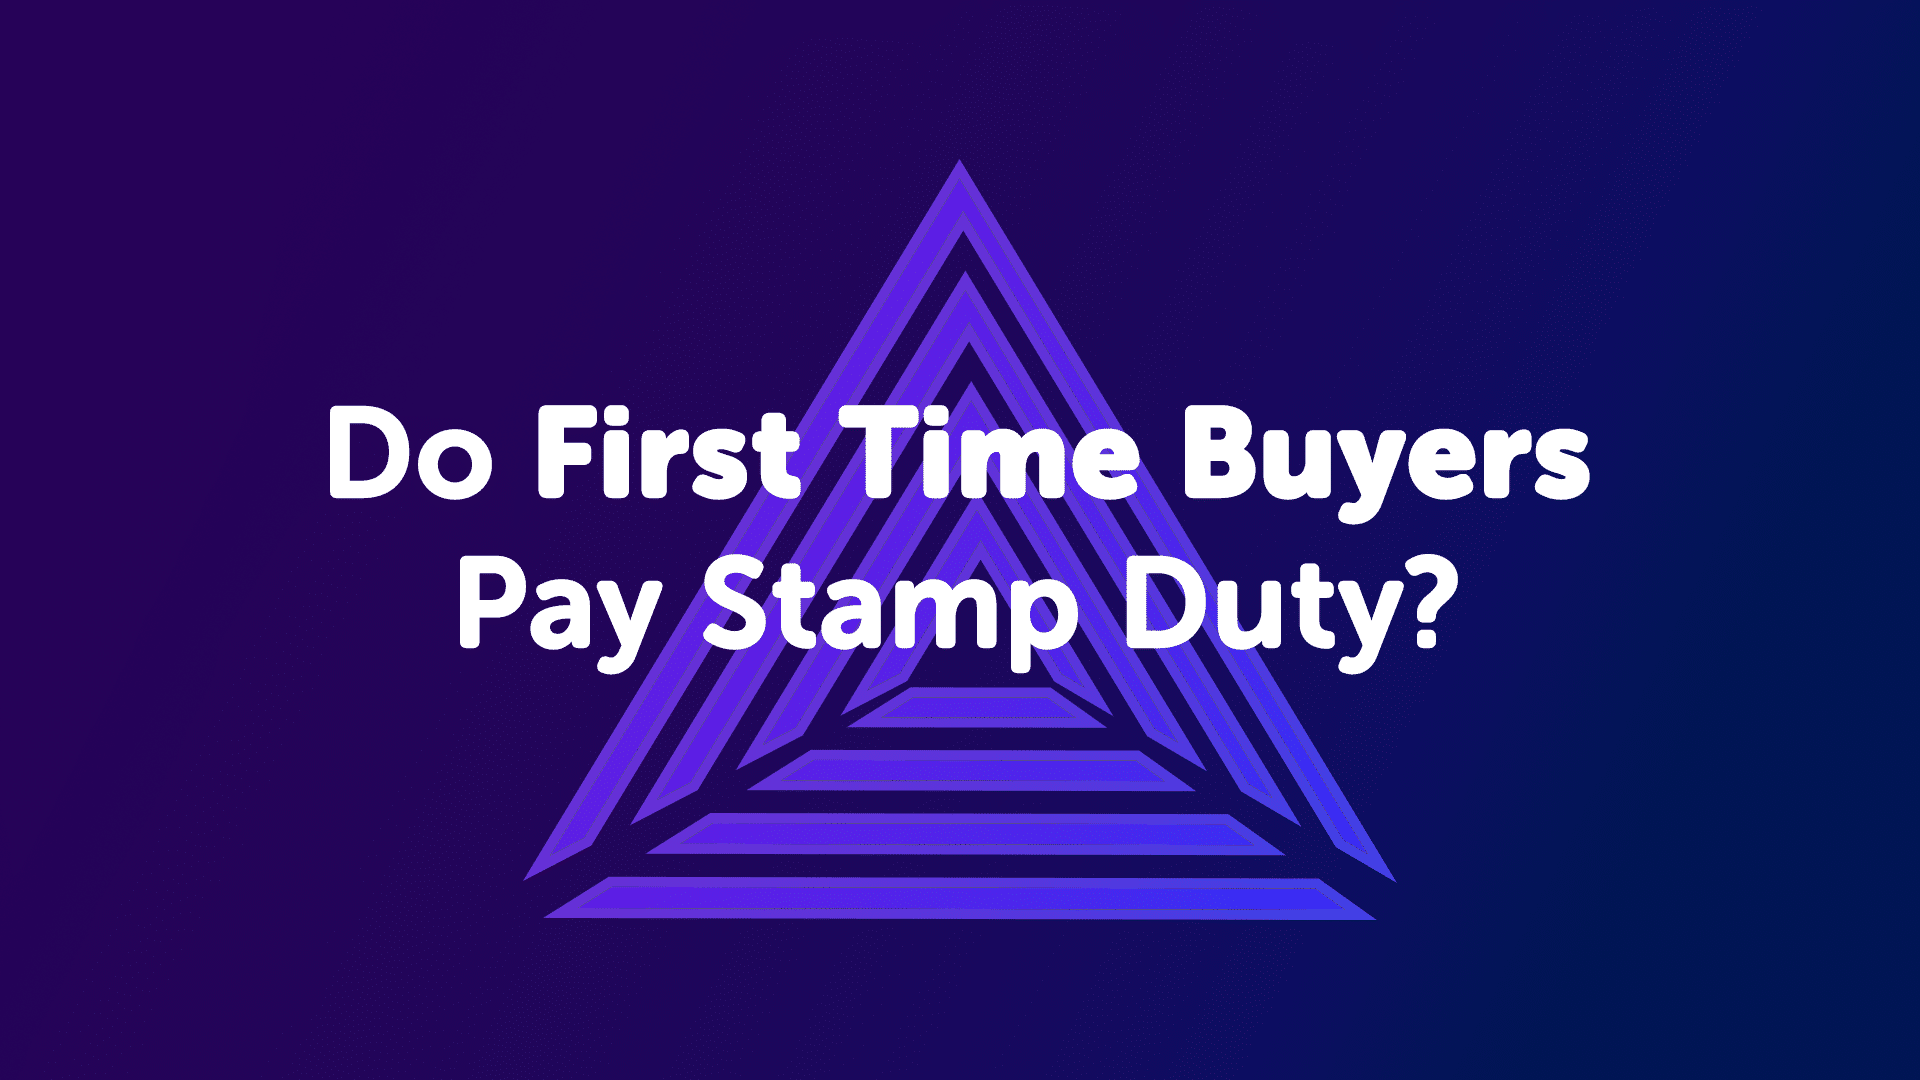 Do First Time Buyers in Sheffield Pay Stamp Duty?